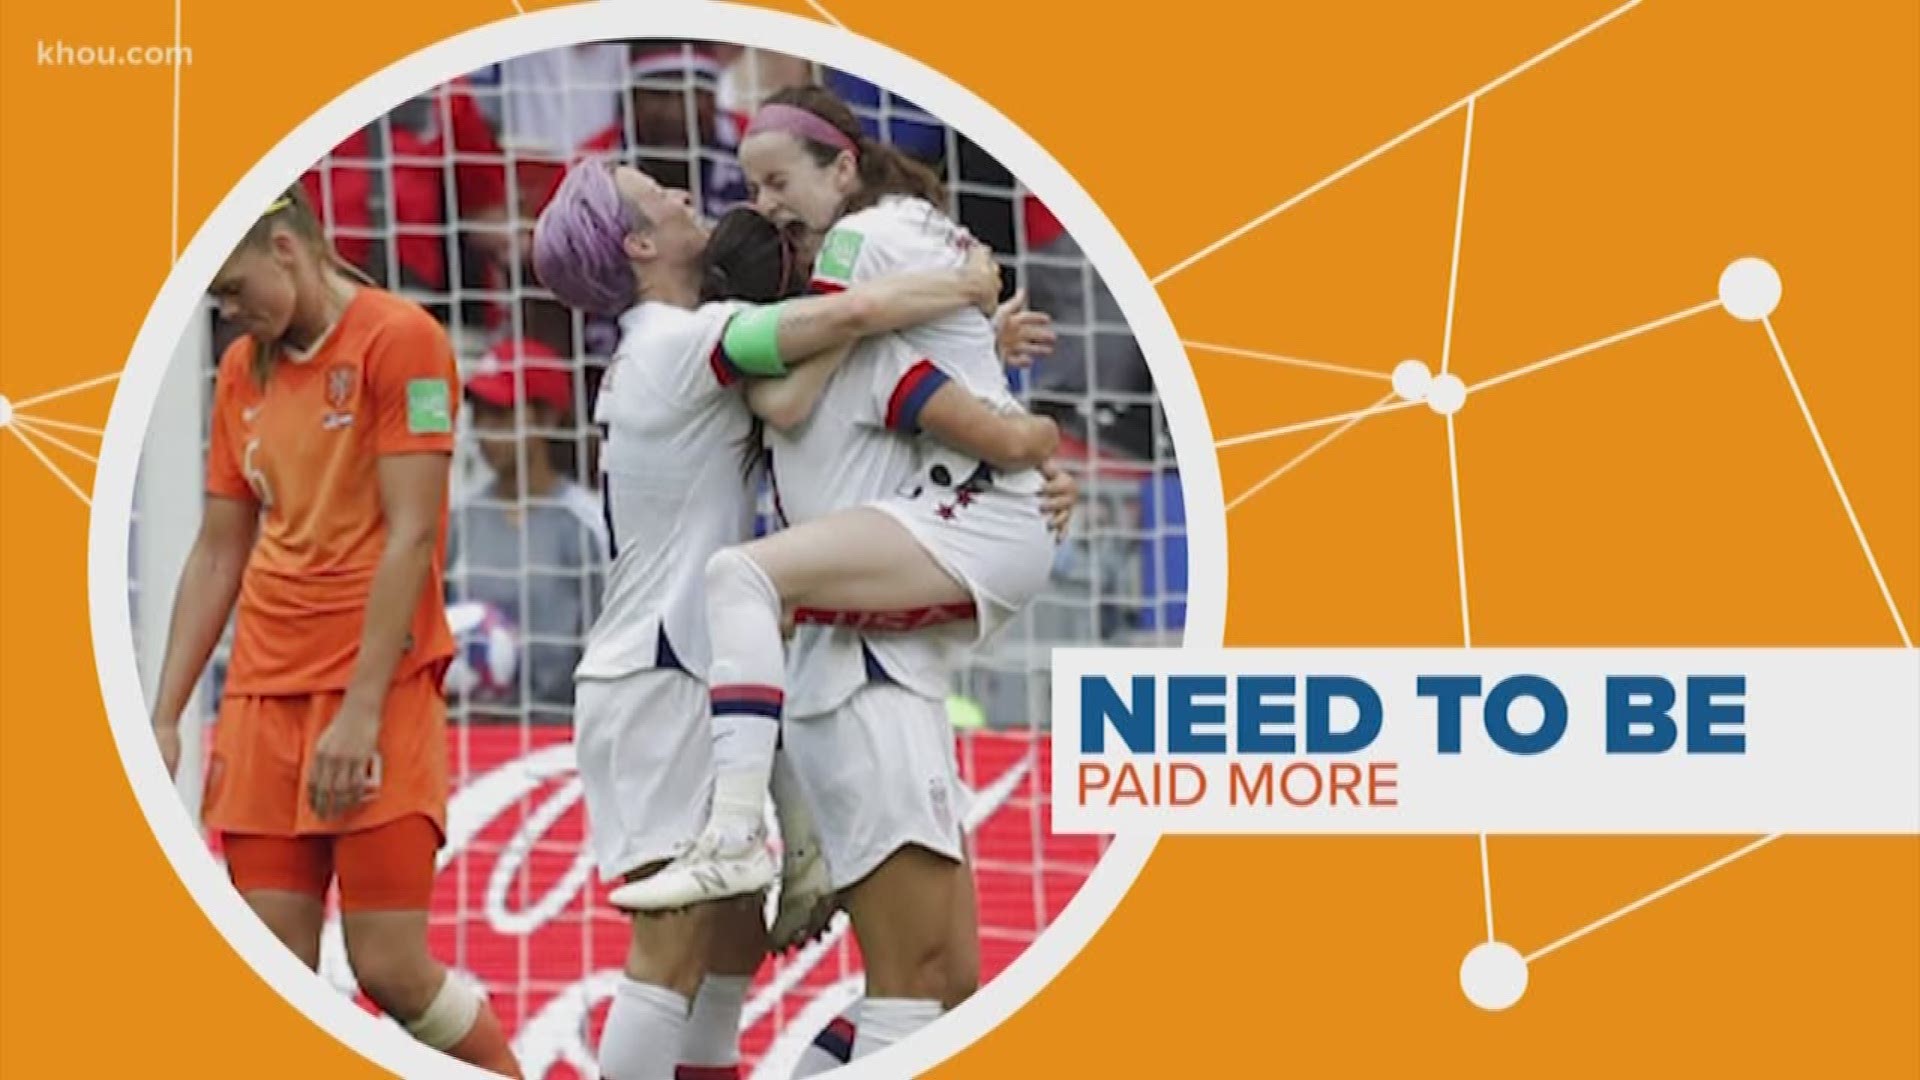 As the U.S. women's soccer team prepares to celebrate their World Cup victory, their gender discrimination lawsuit on equal pay once again takes center stage.